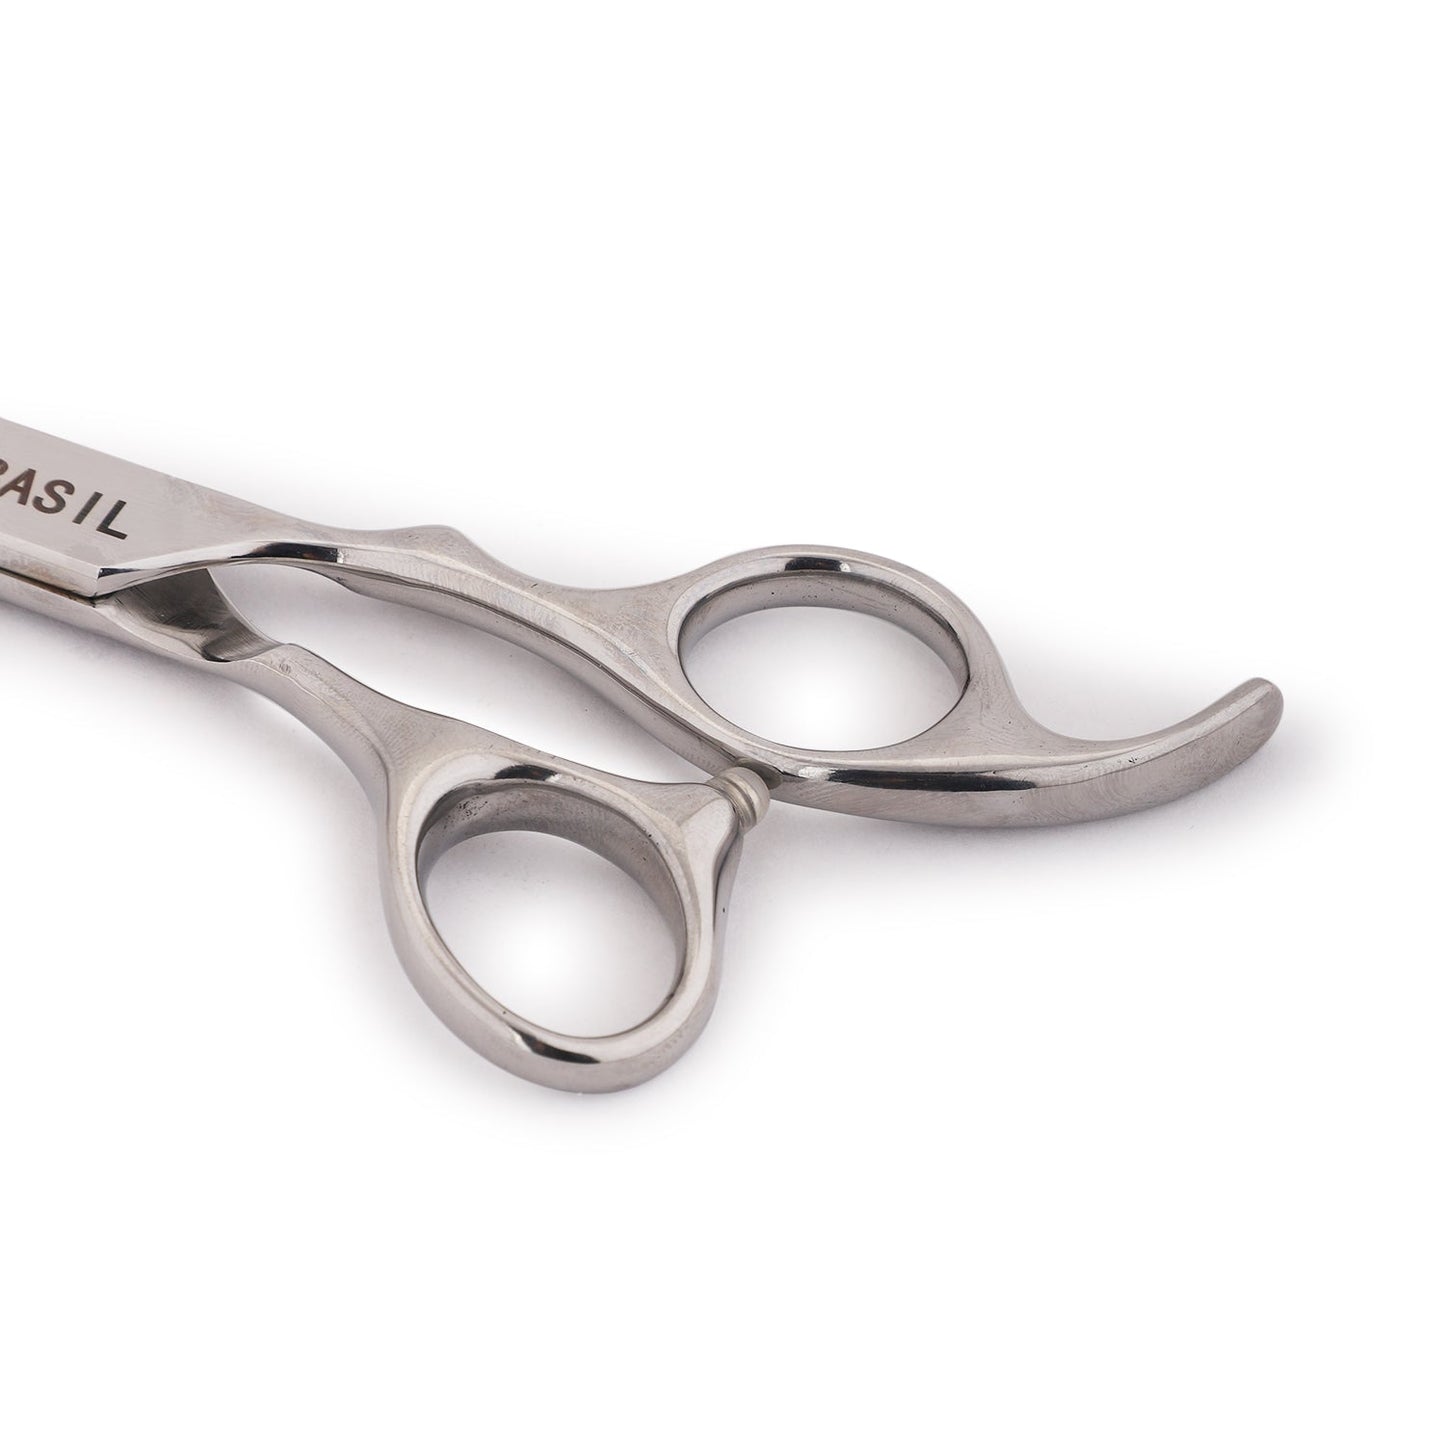 Basil Straight Pro Scissor for Pet Grooming | 7.5 Inches | Stainless Steel